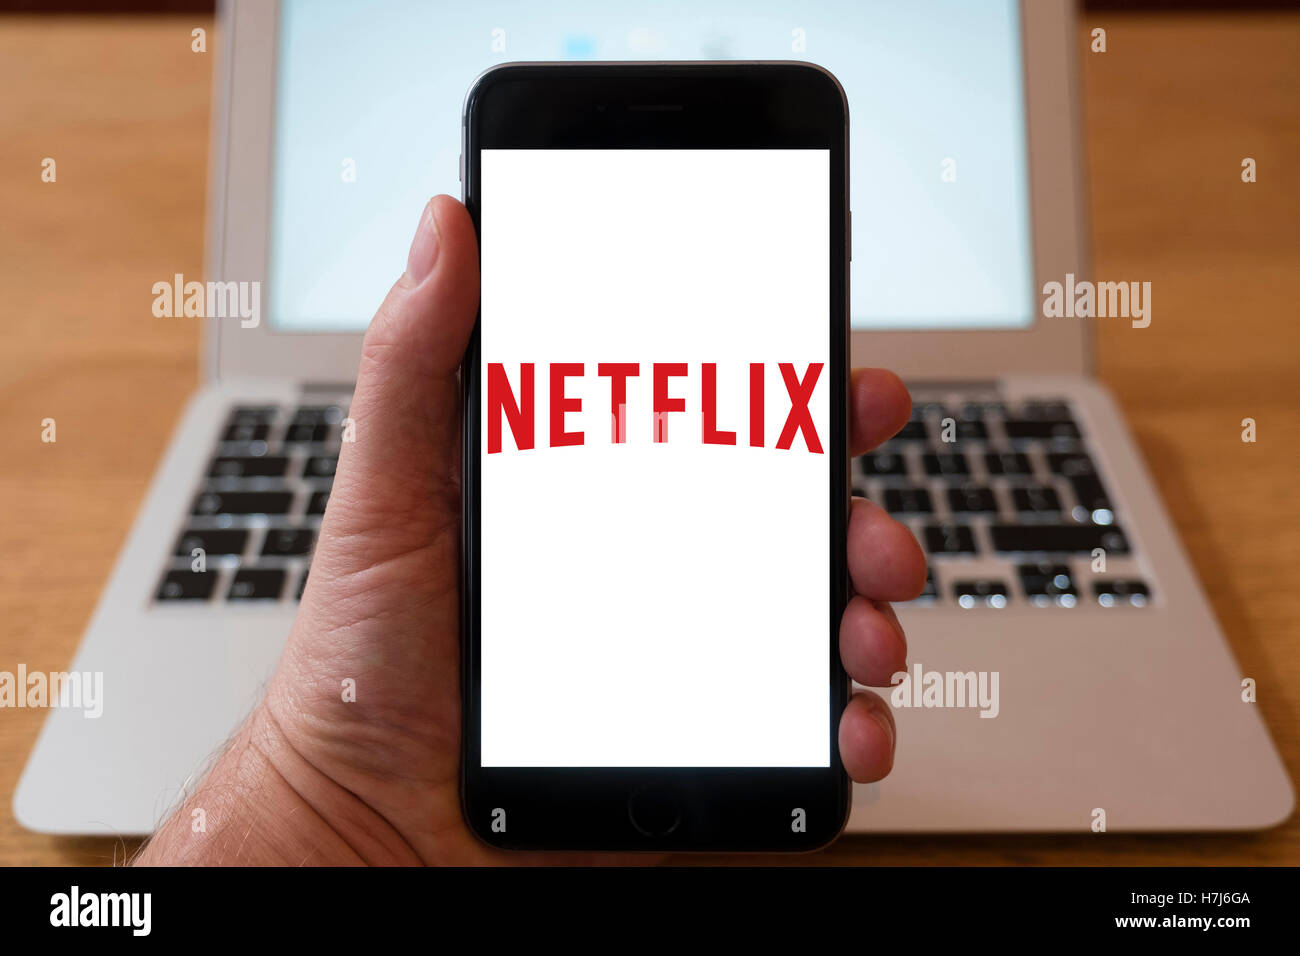 Using iPhone smartphone to display logo of Netflix movie streaming service Stock Photo